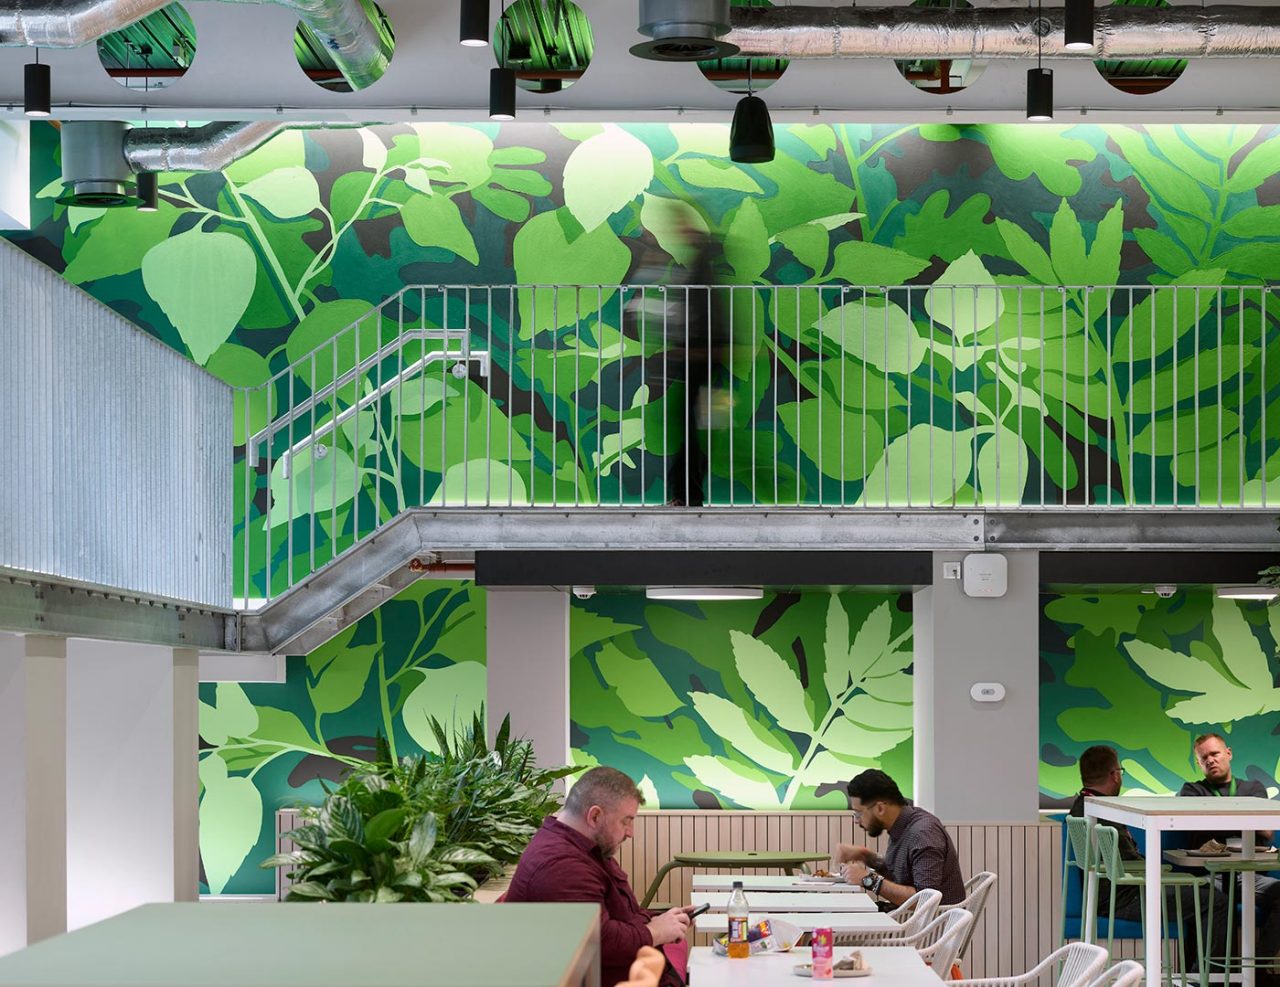 Men seated at cafe table with large green botanical mural on the wall behind